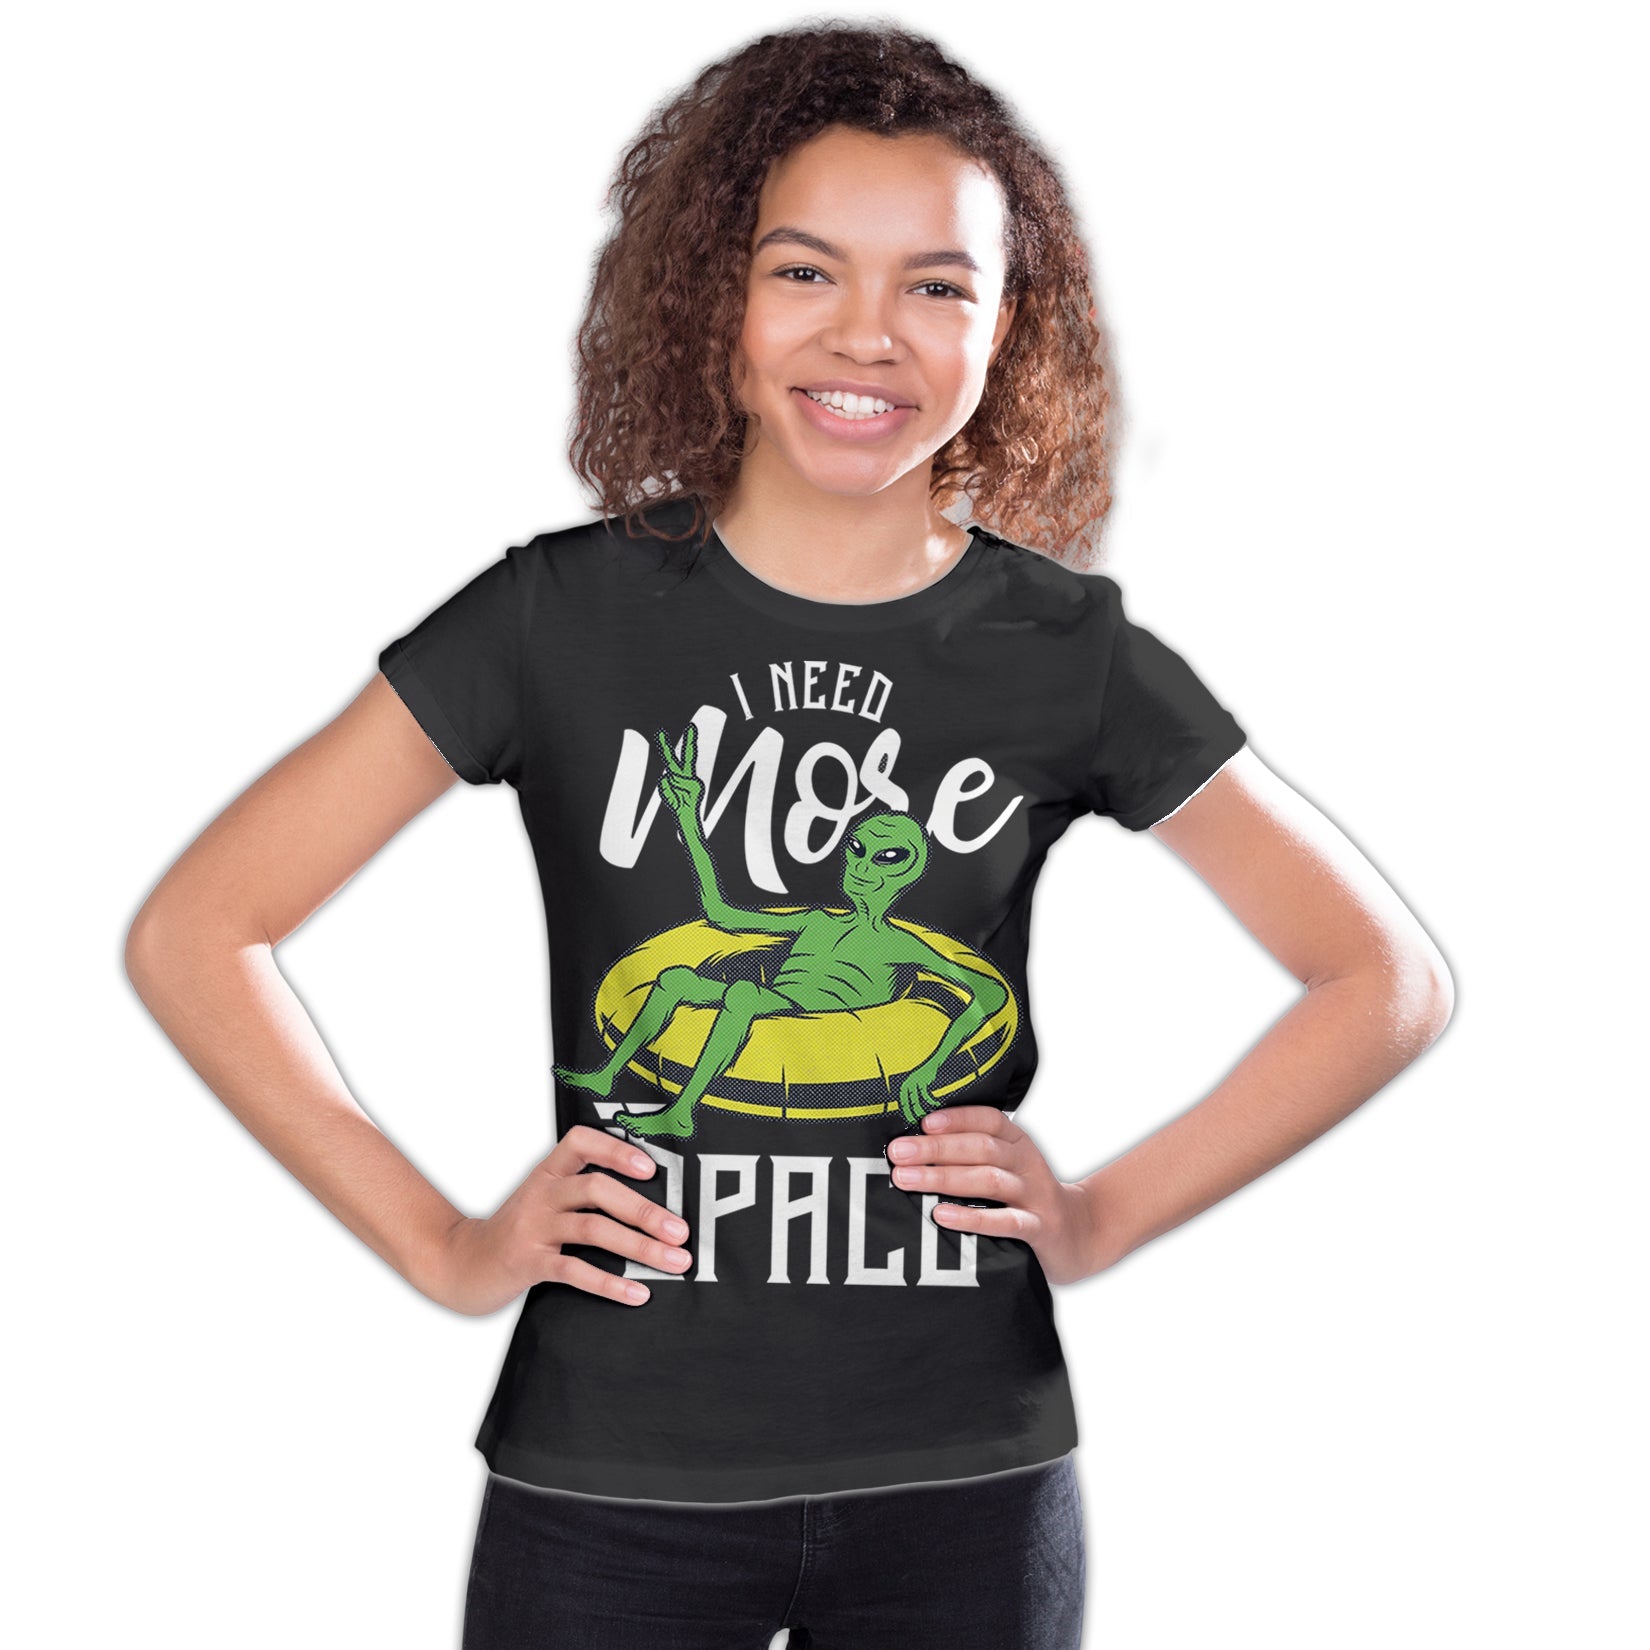 Science Space I Need More Alien X Parody Nerd Geek Chic Lol Official Youth T-shirt